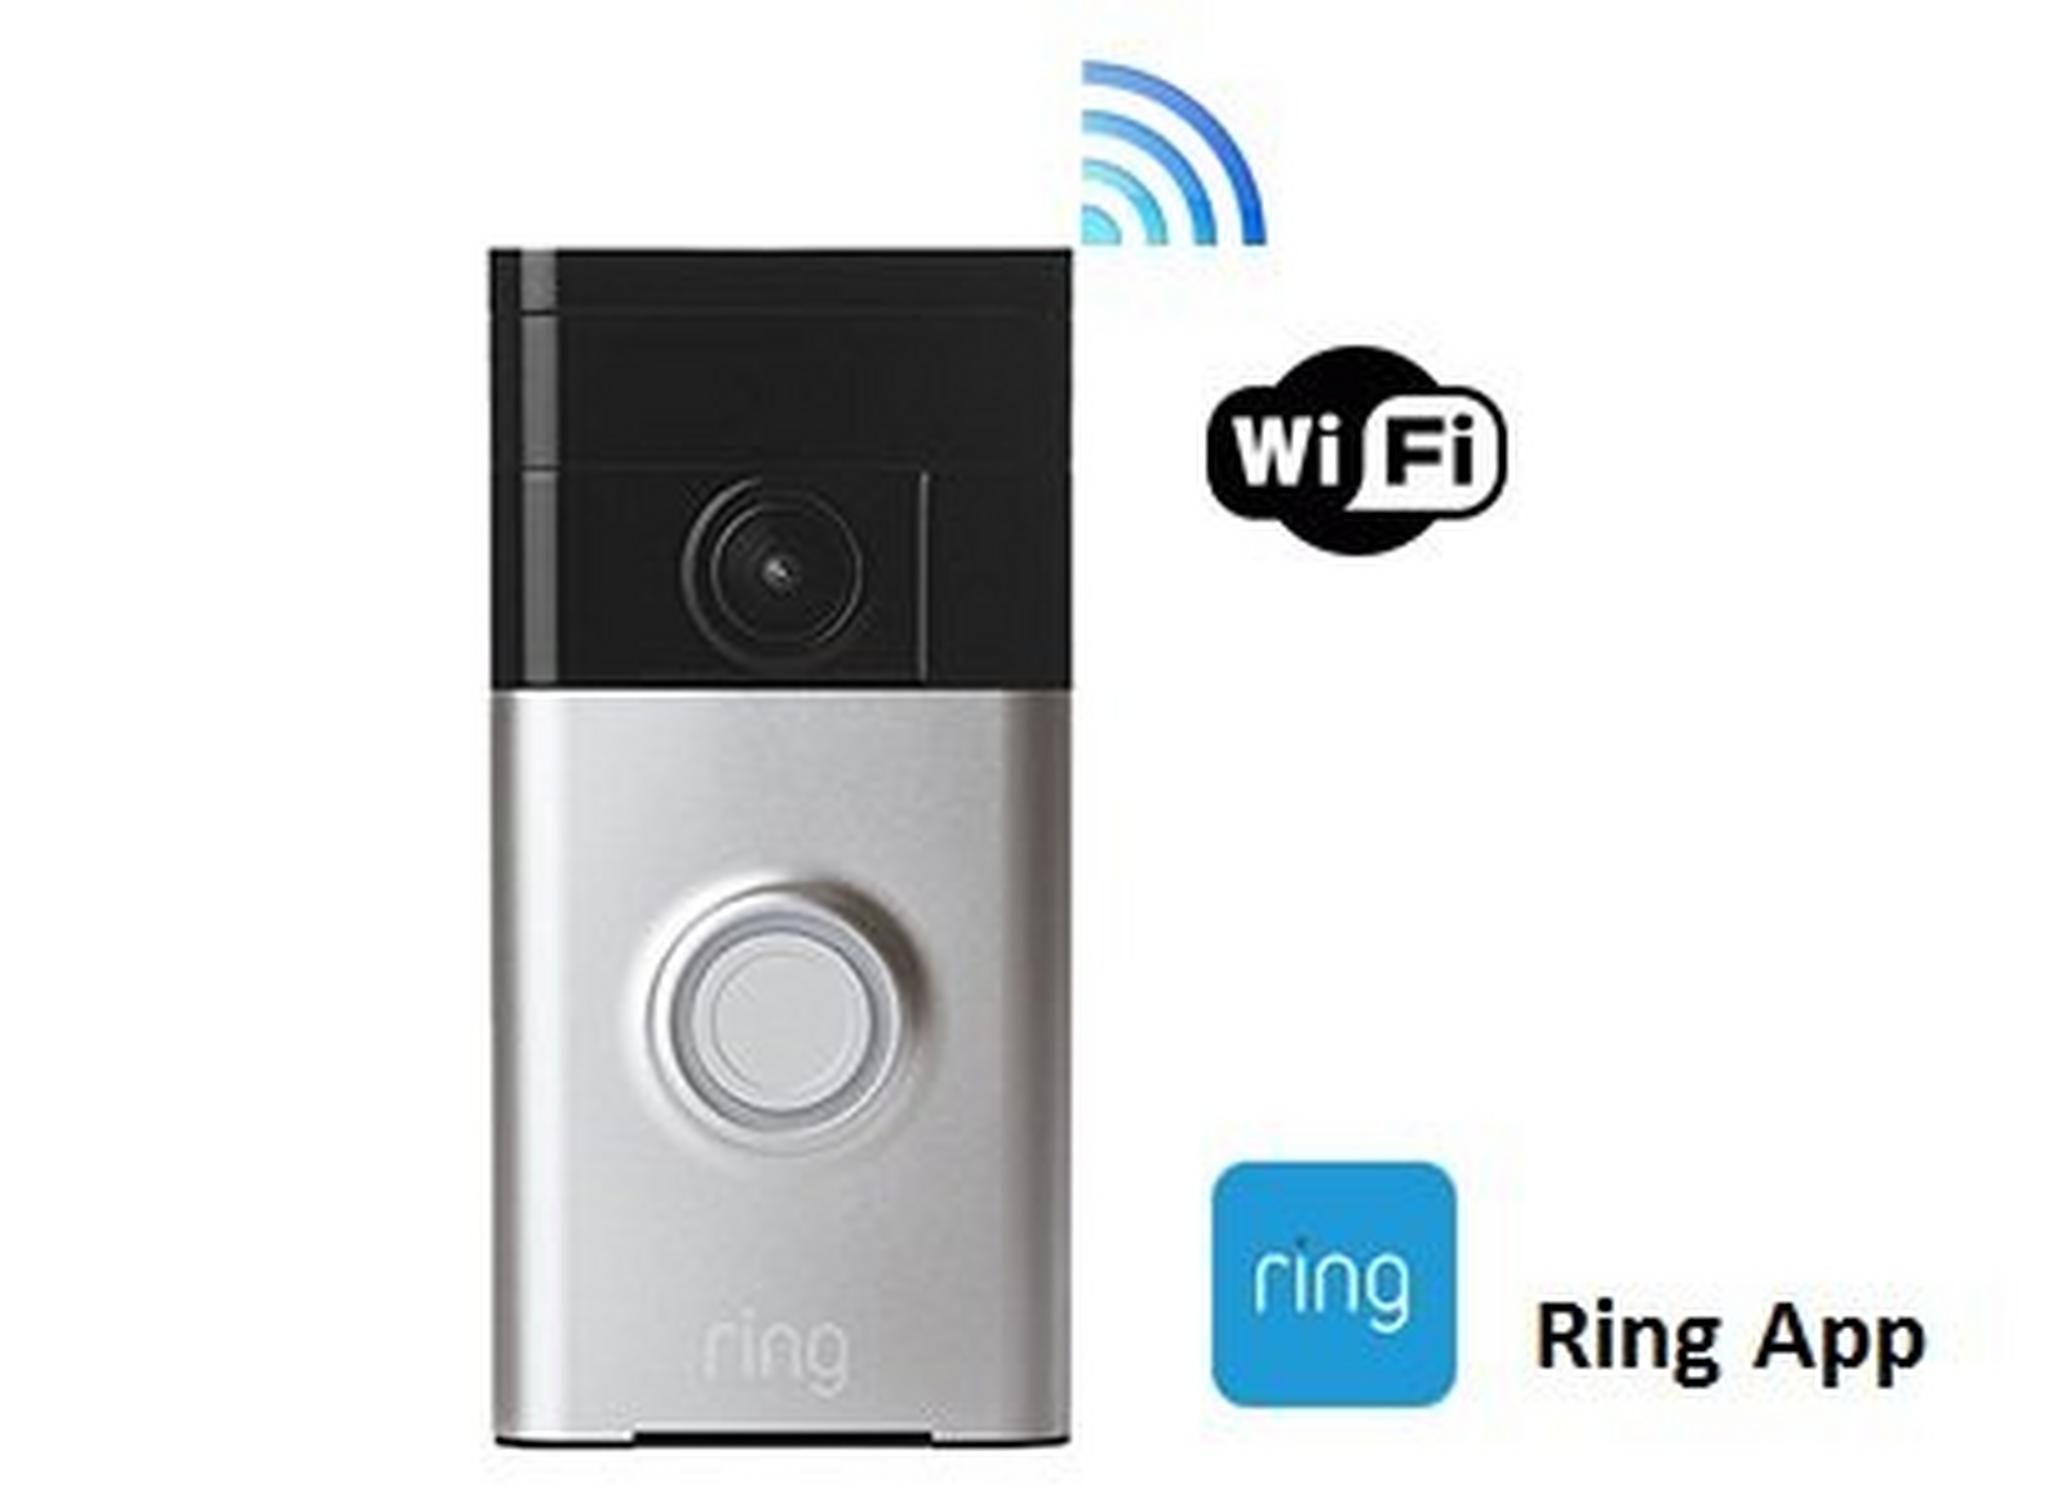 Ring Video Doorbell 2nd Gen-Satin Nickel with Built-in Rechargeable Battery or Hardwired, 88RG000FC01 - Silver/Black